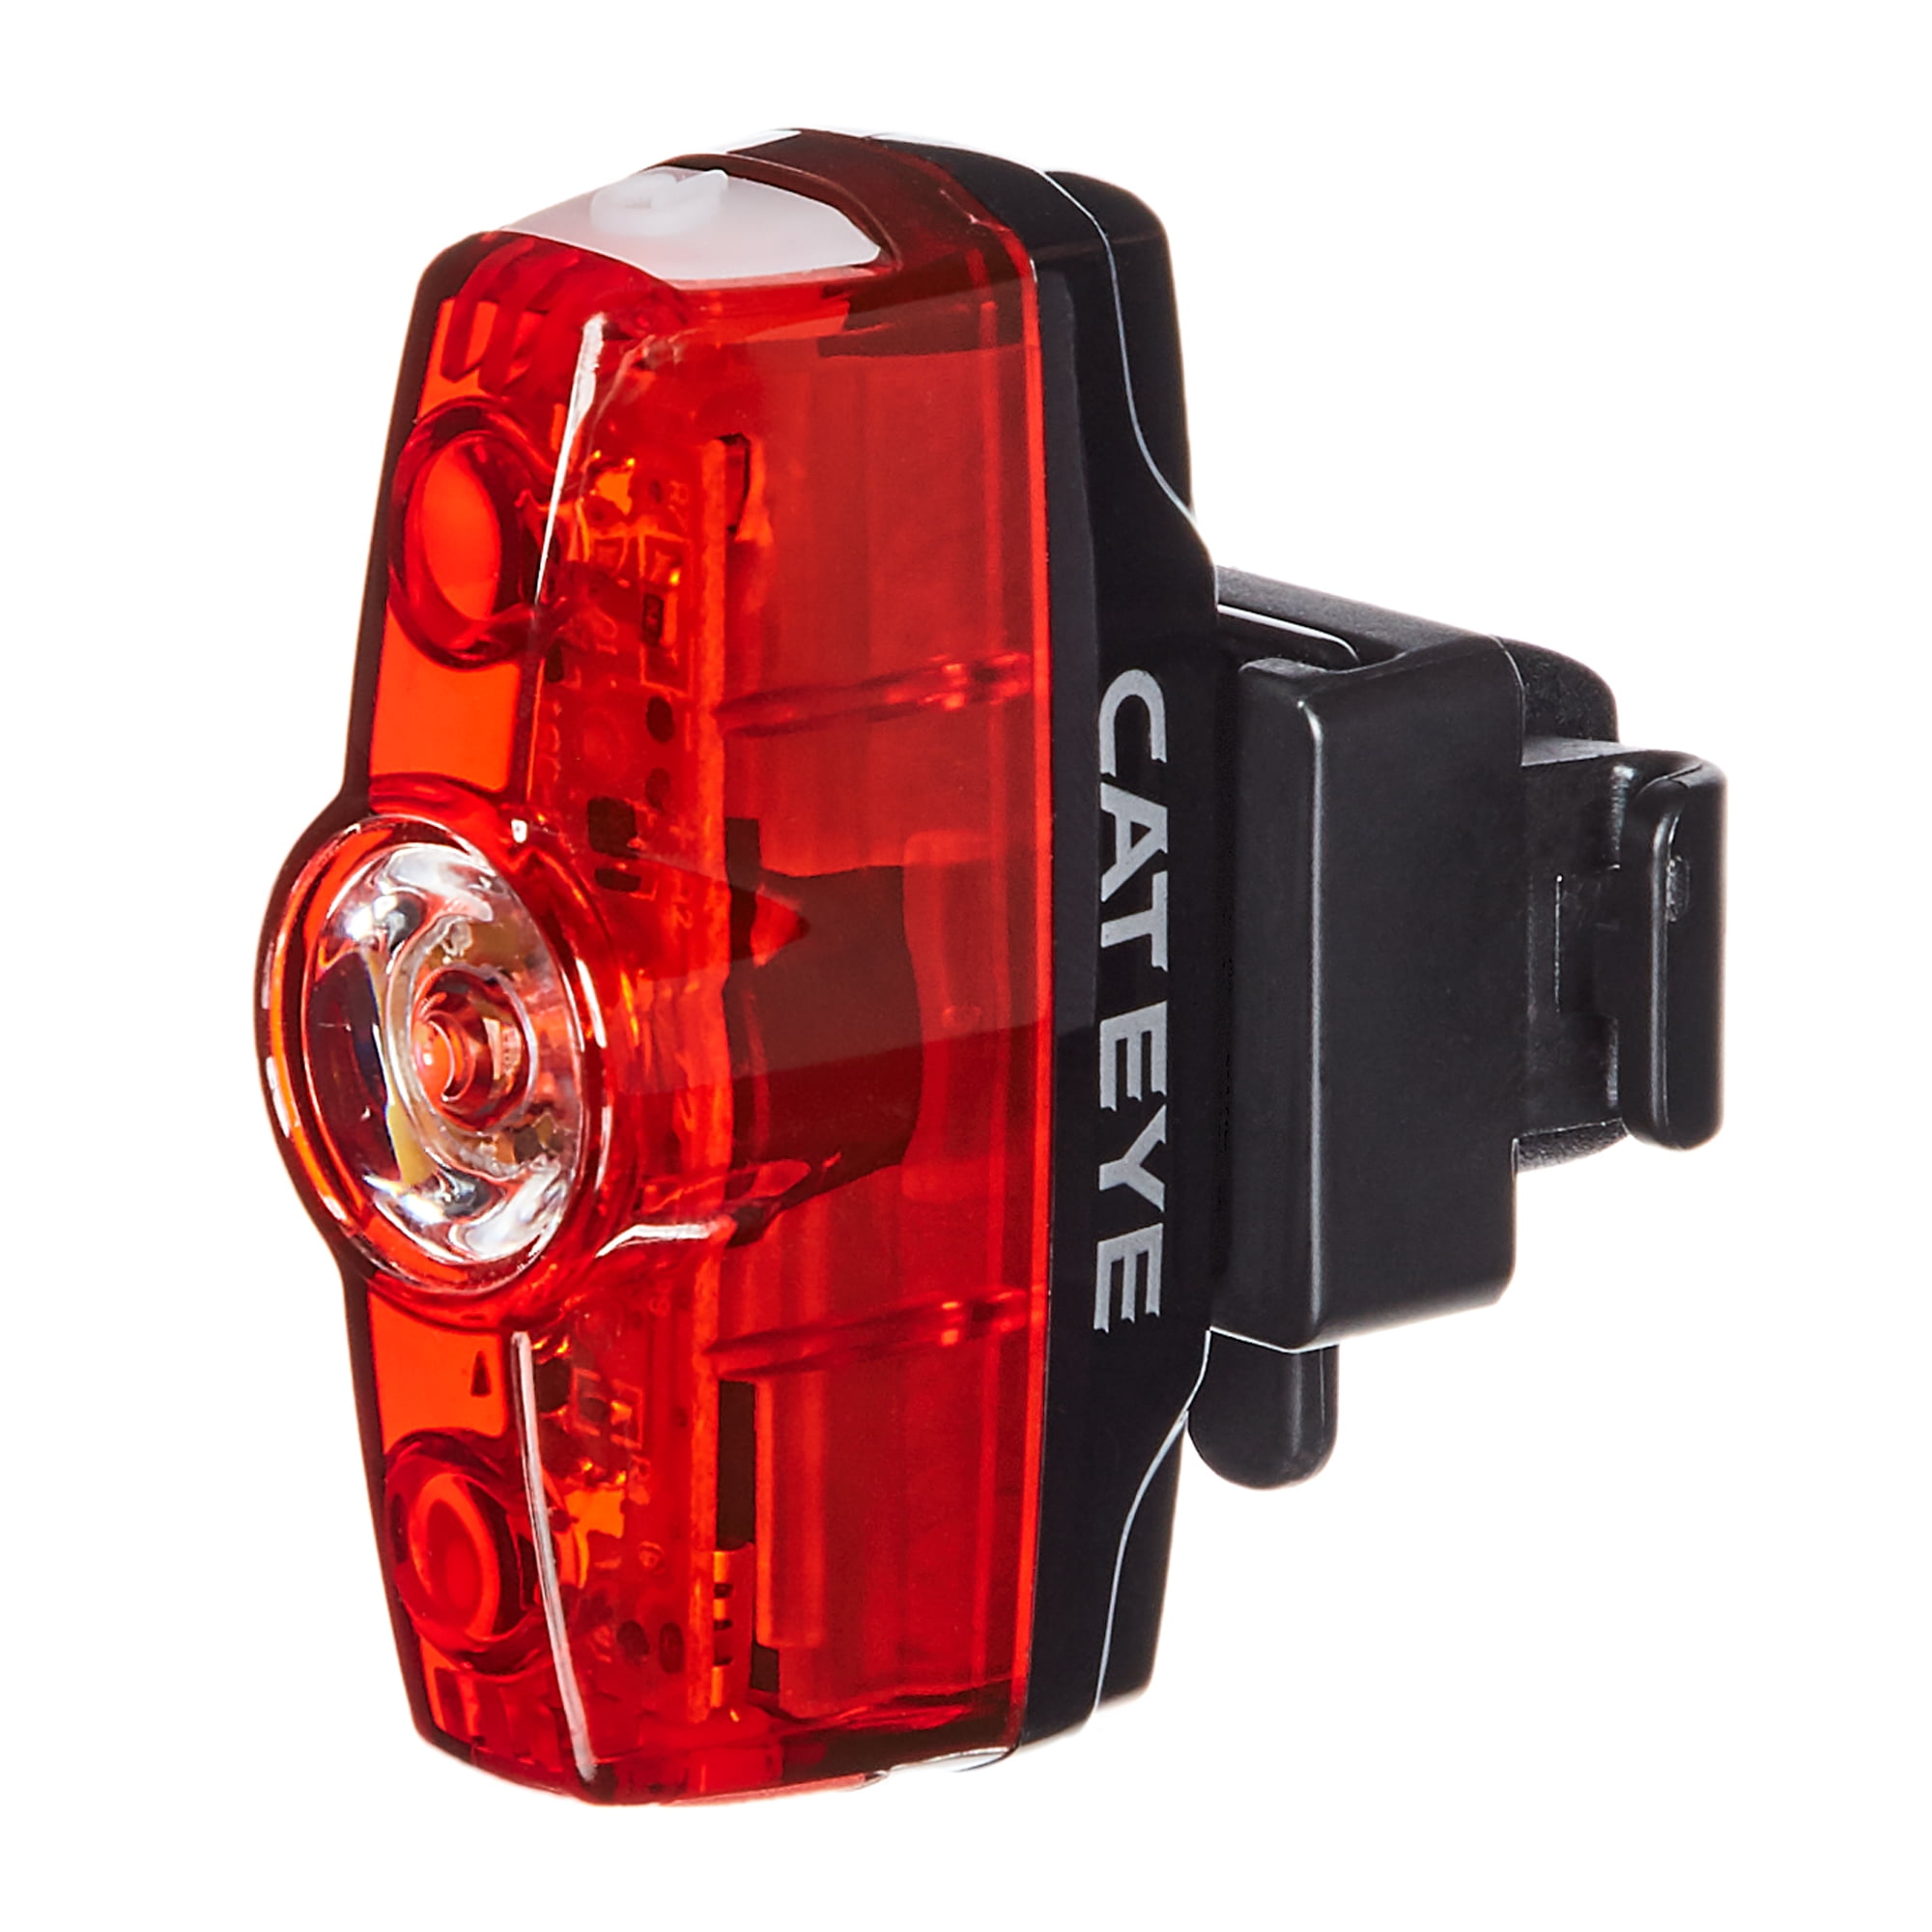 Taillight LED Bicycle Bike Safety Rear Light Warning 1200 Lumen Rechargeable 